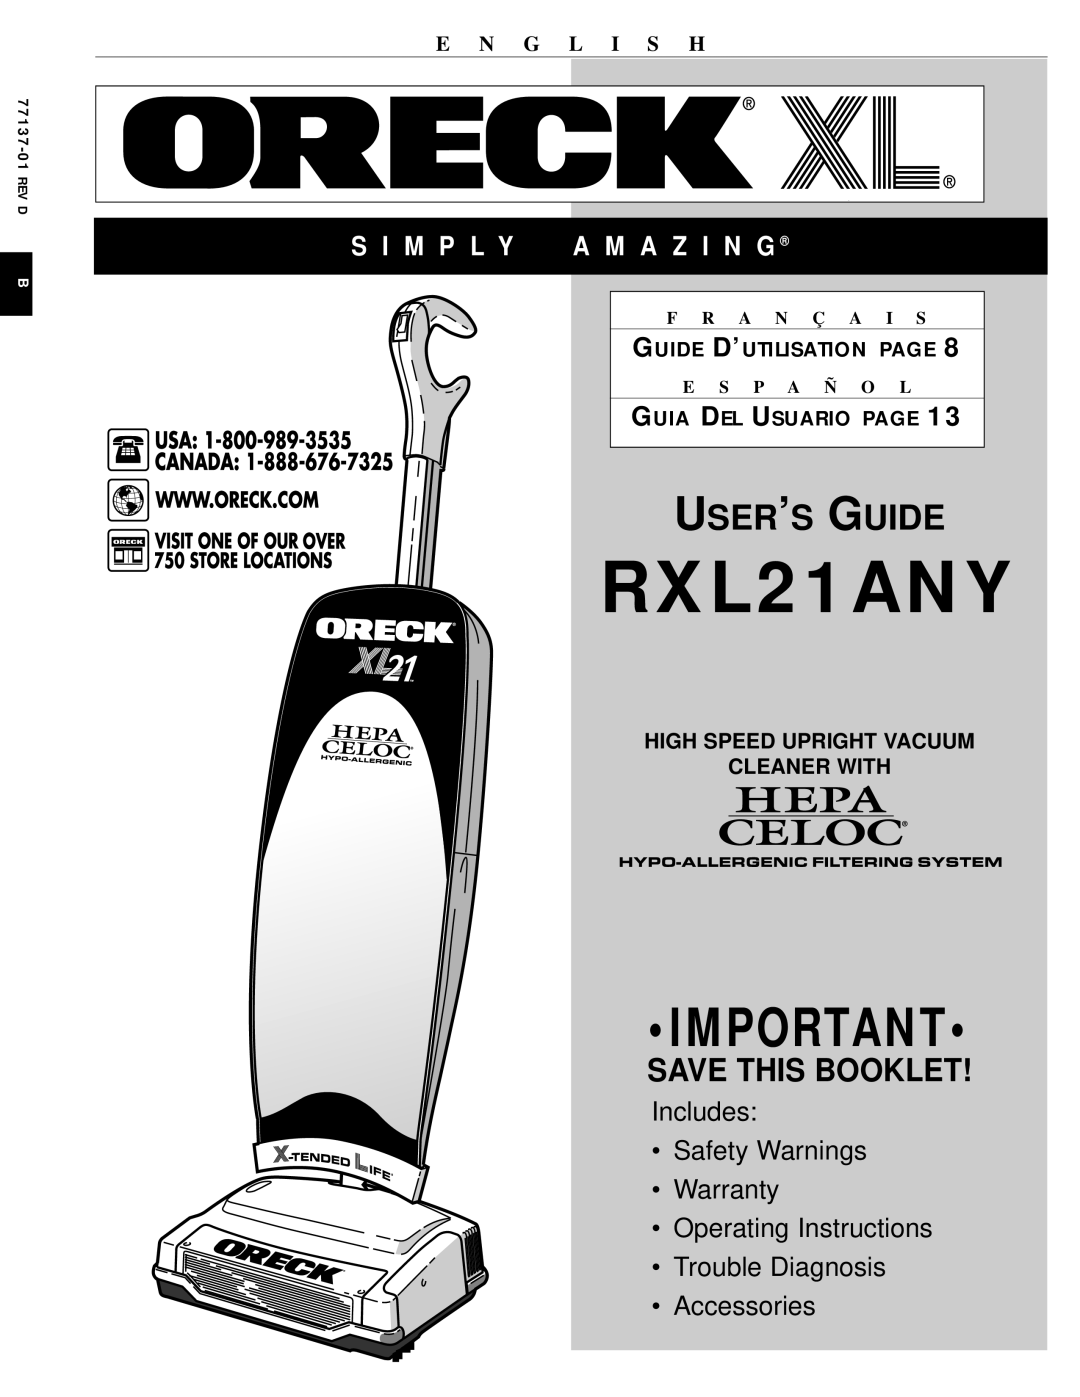 Oreck RXL21ANY warranty E N G, L I S H, High Speed Upright Vacuum Cleaner With, Guide D’Utilisation Page, User’S Guide 